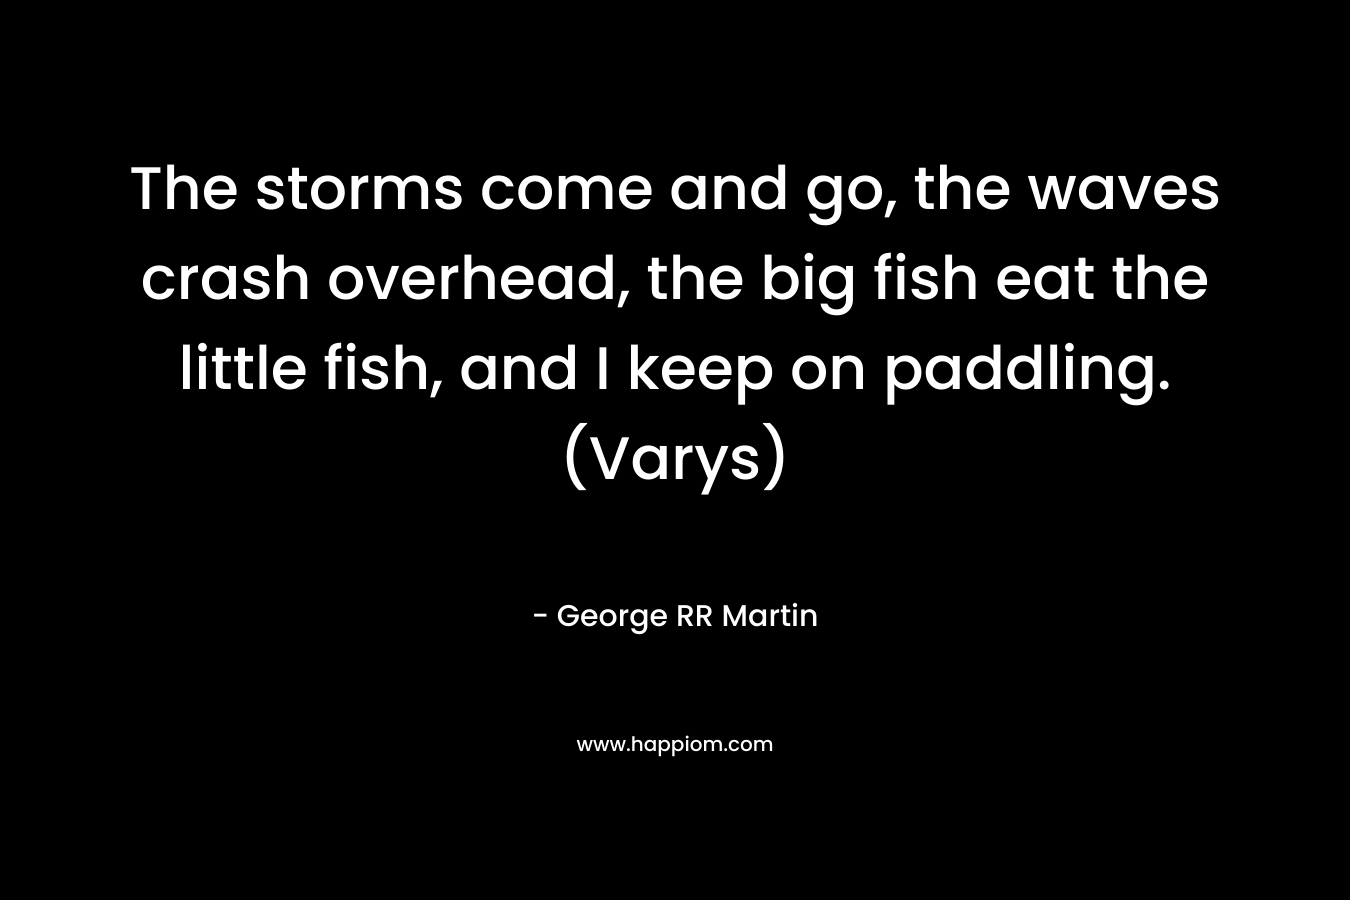 The storms come and go, the waves crash overhead, the big fish eat the little fish, and I keep on paddling. (Varys) – George RR Martin